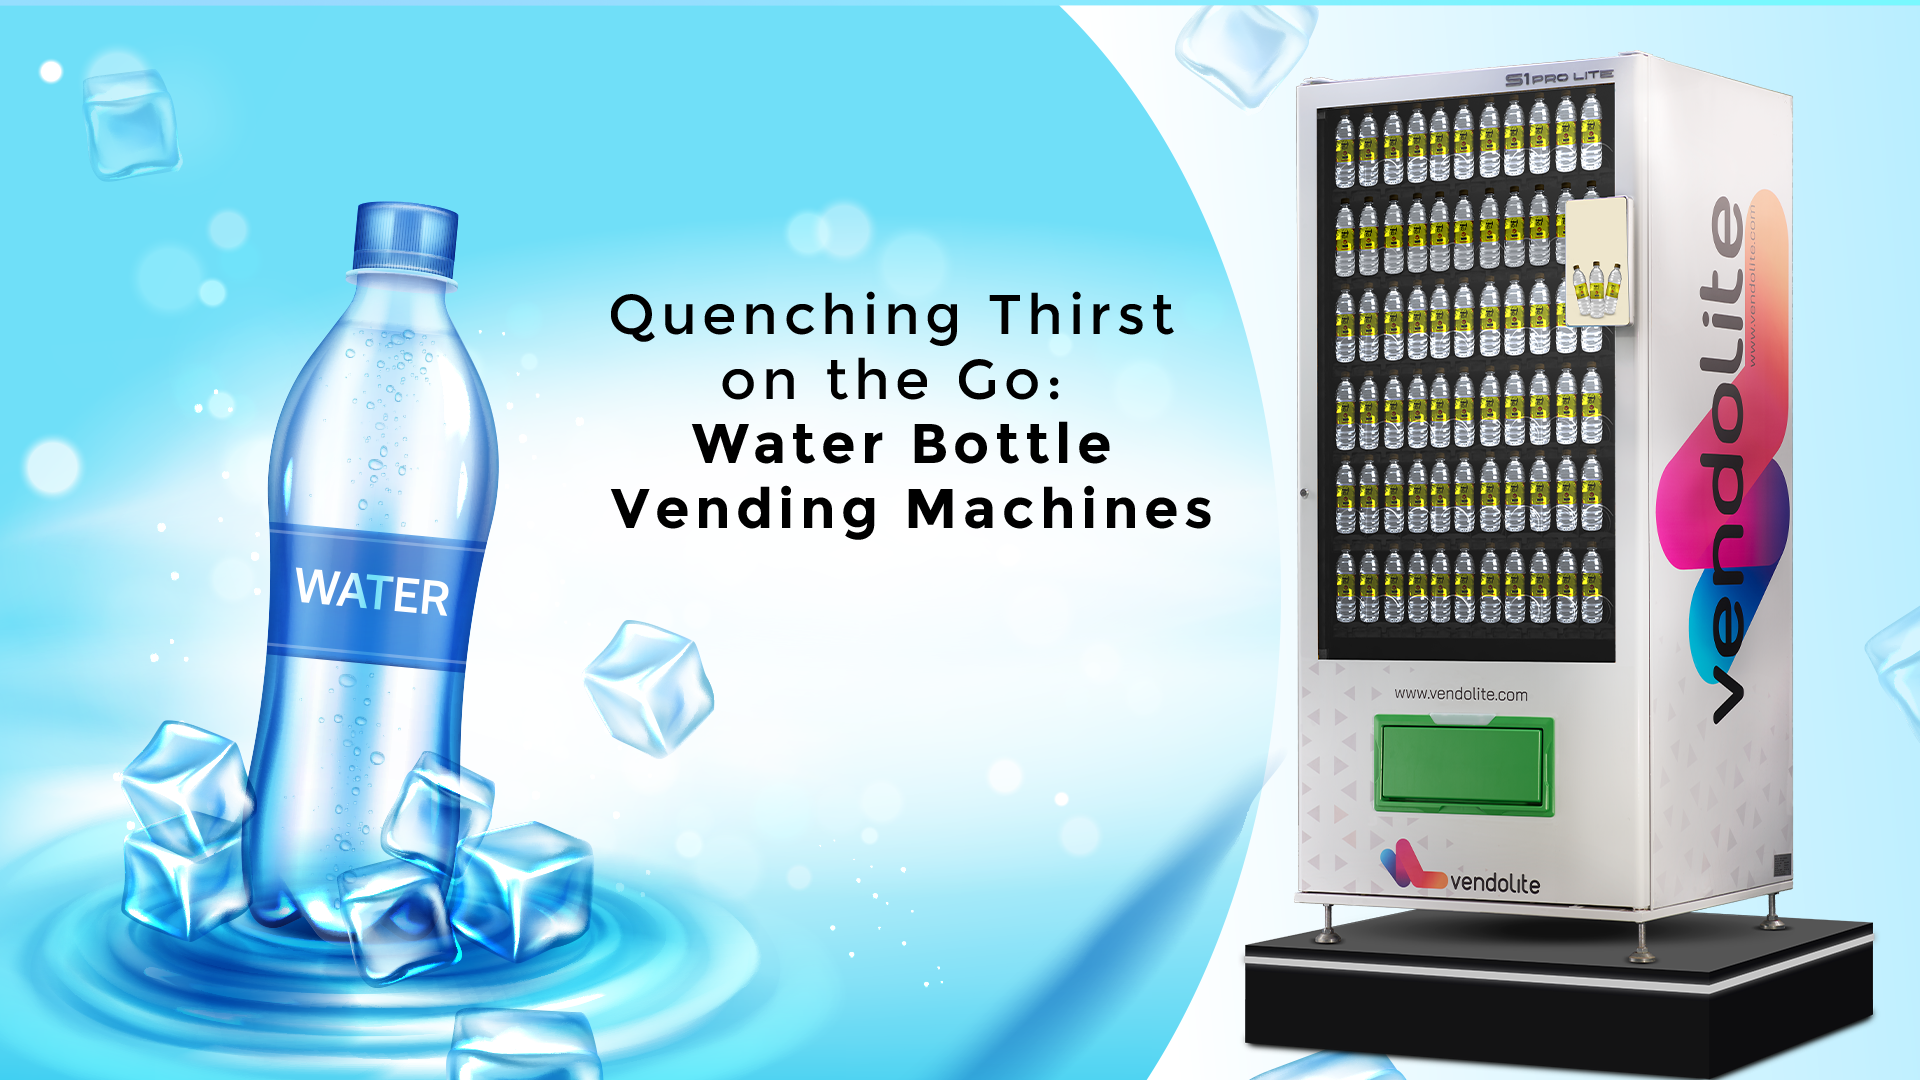 Quenching Thirst on the Go: Water Bottle Vending Machines